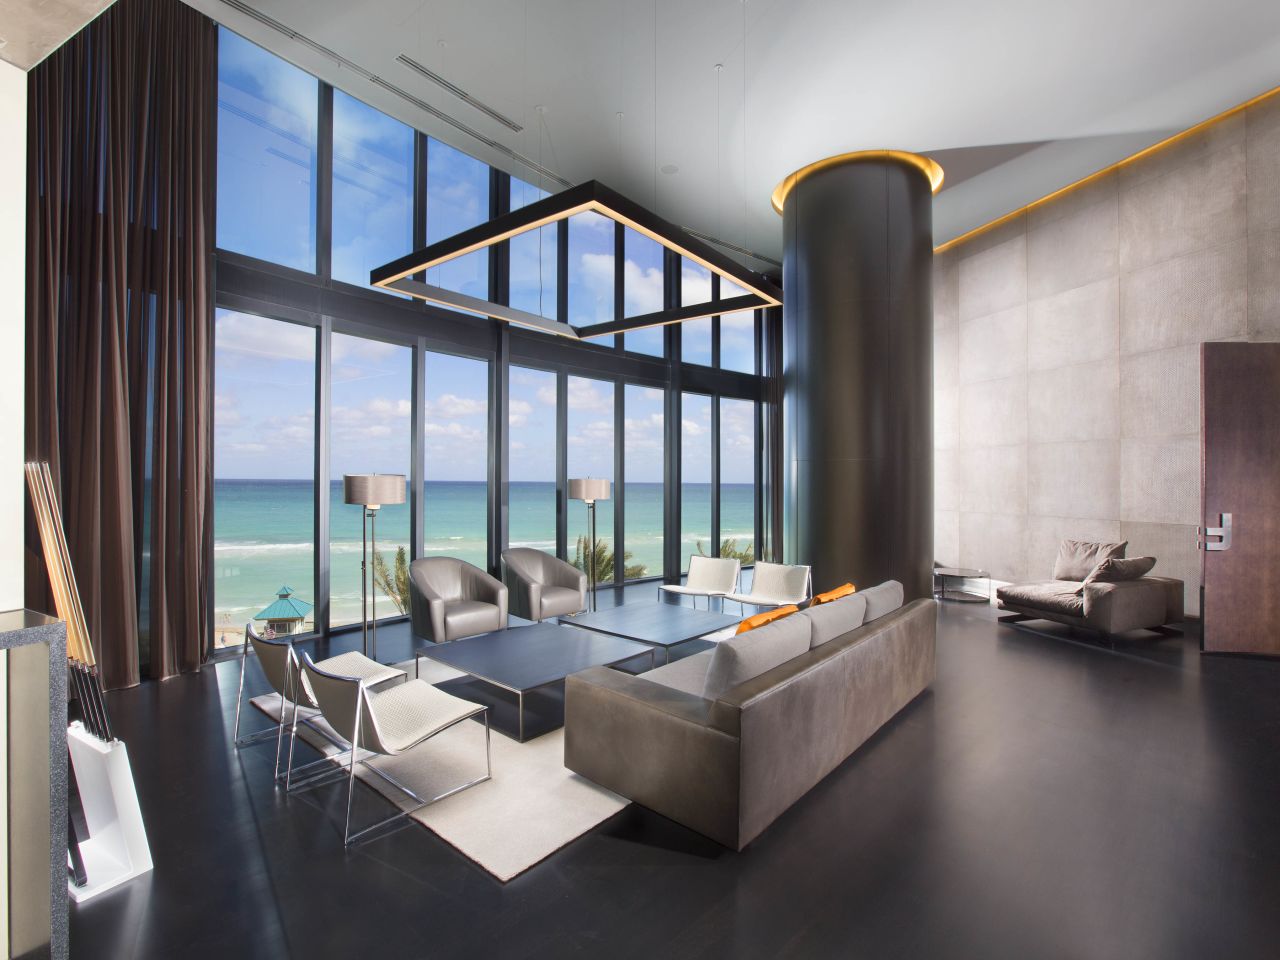 Standard units, such as the one pictured, range from 4,252 and 16,915 square feet. Two penthouses, taking up the top four floors, are 20,000 square feet.